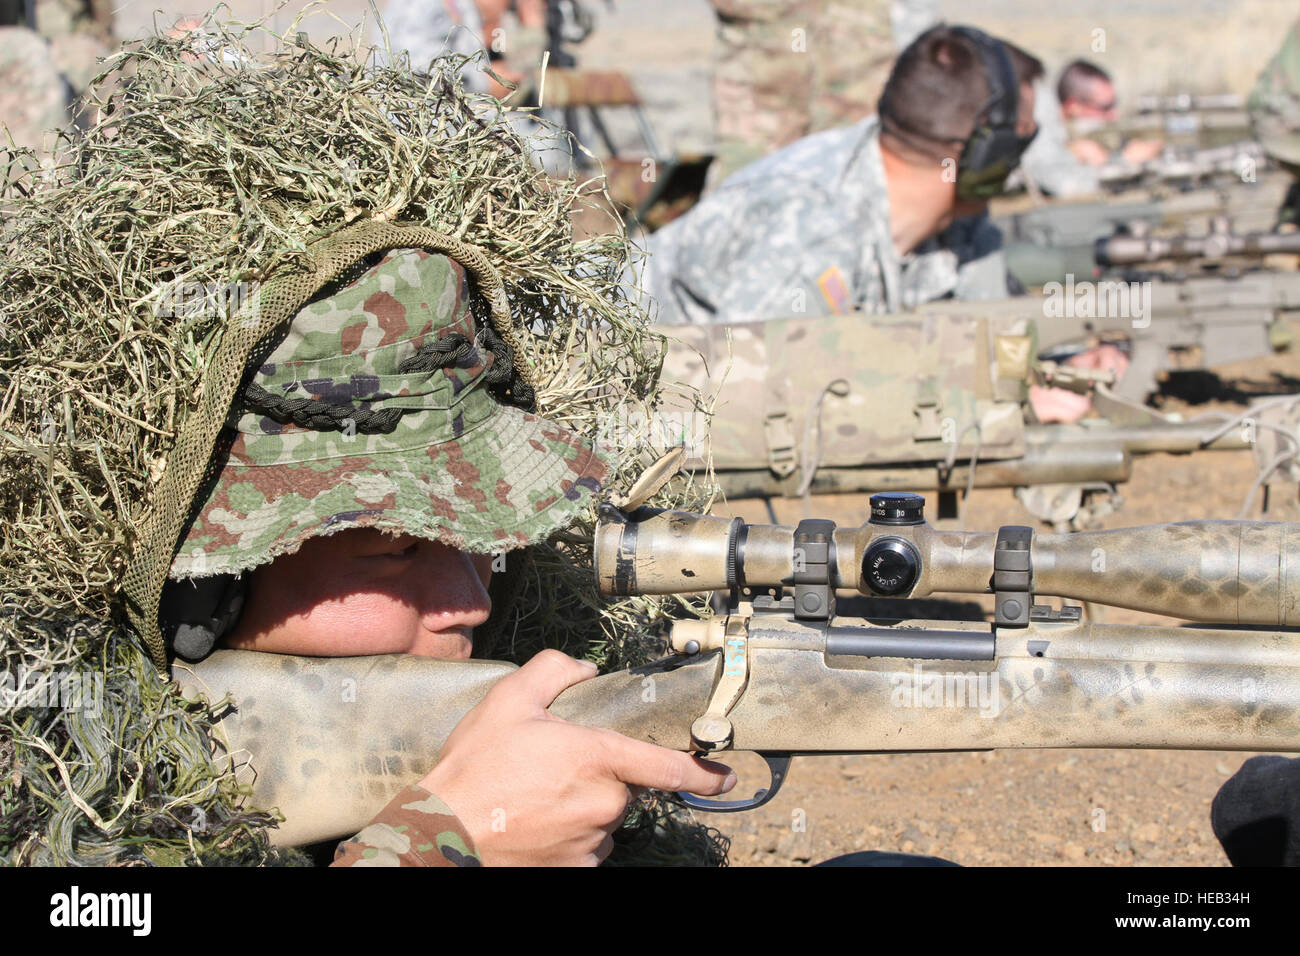 A U.S. paratrooper scans for targets behind a Barrett .50-caliber sniper  rifle while on a